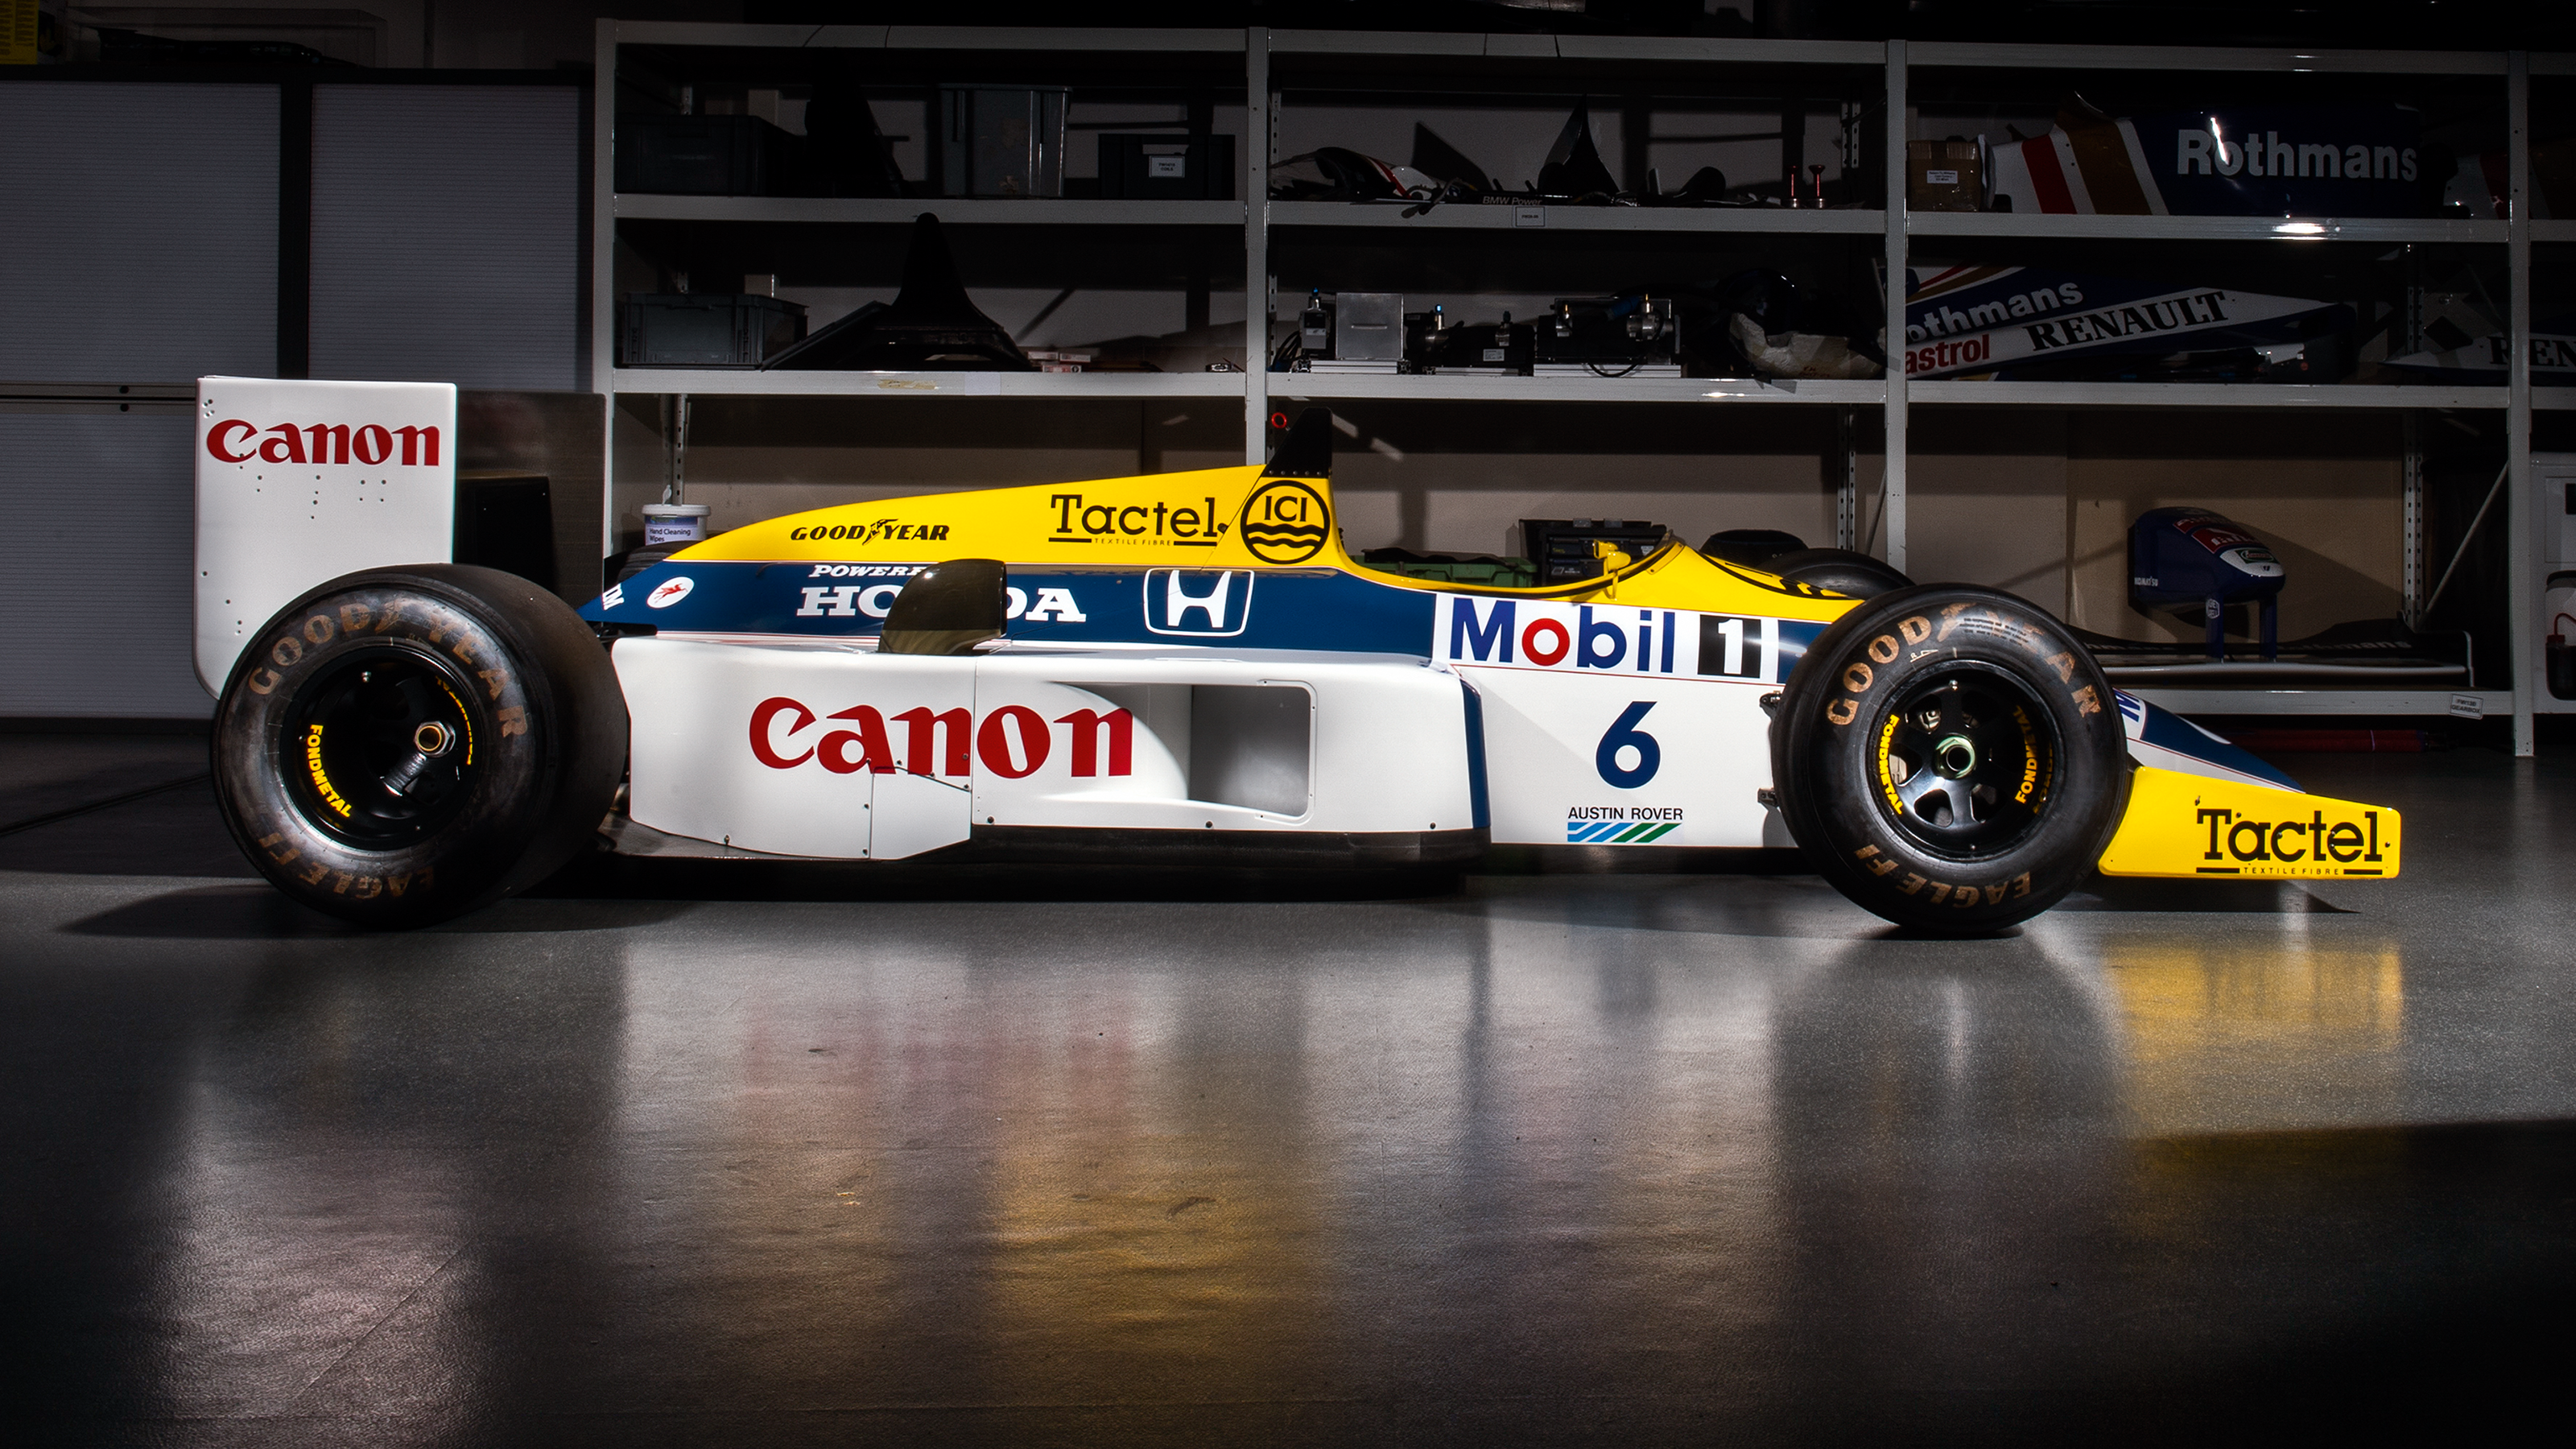 Race Williams' Anniversary Livery in F1 23